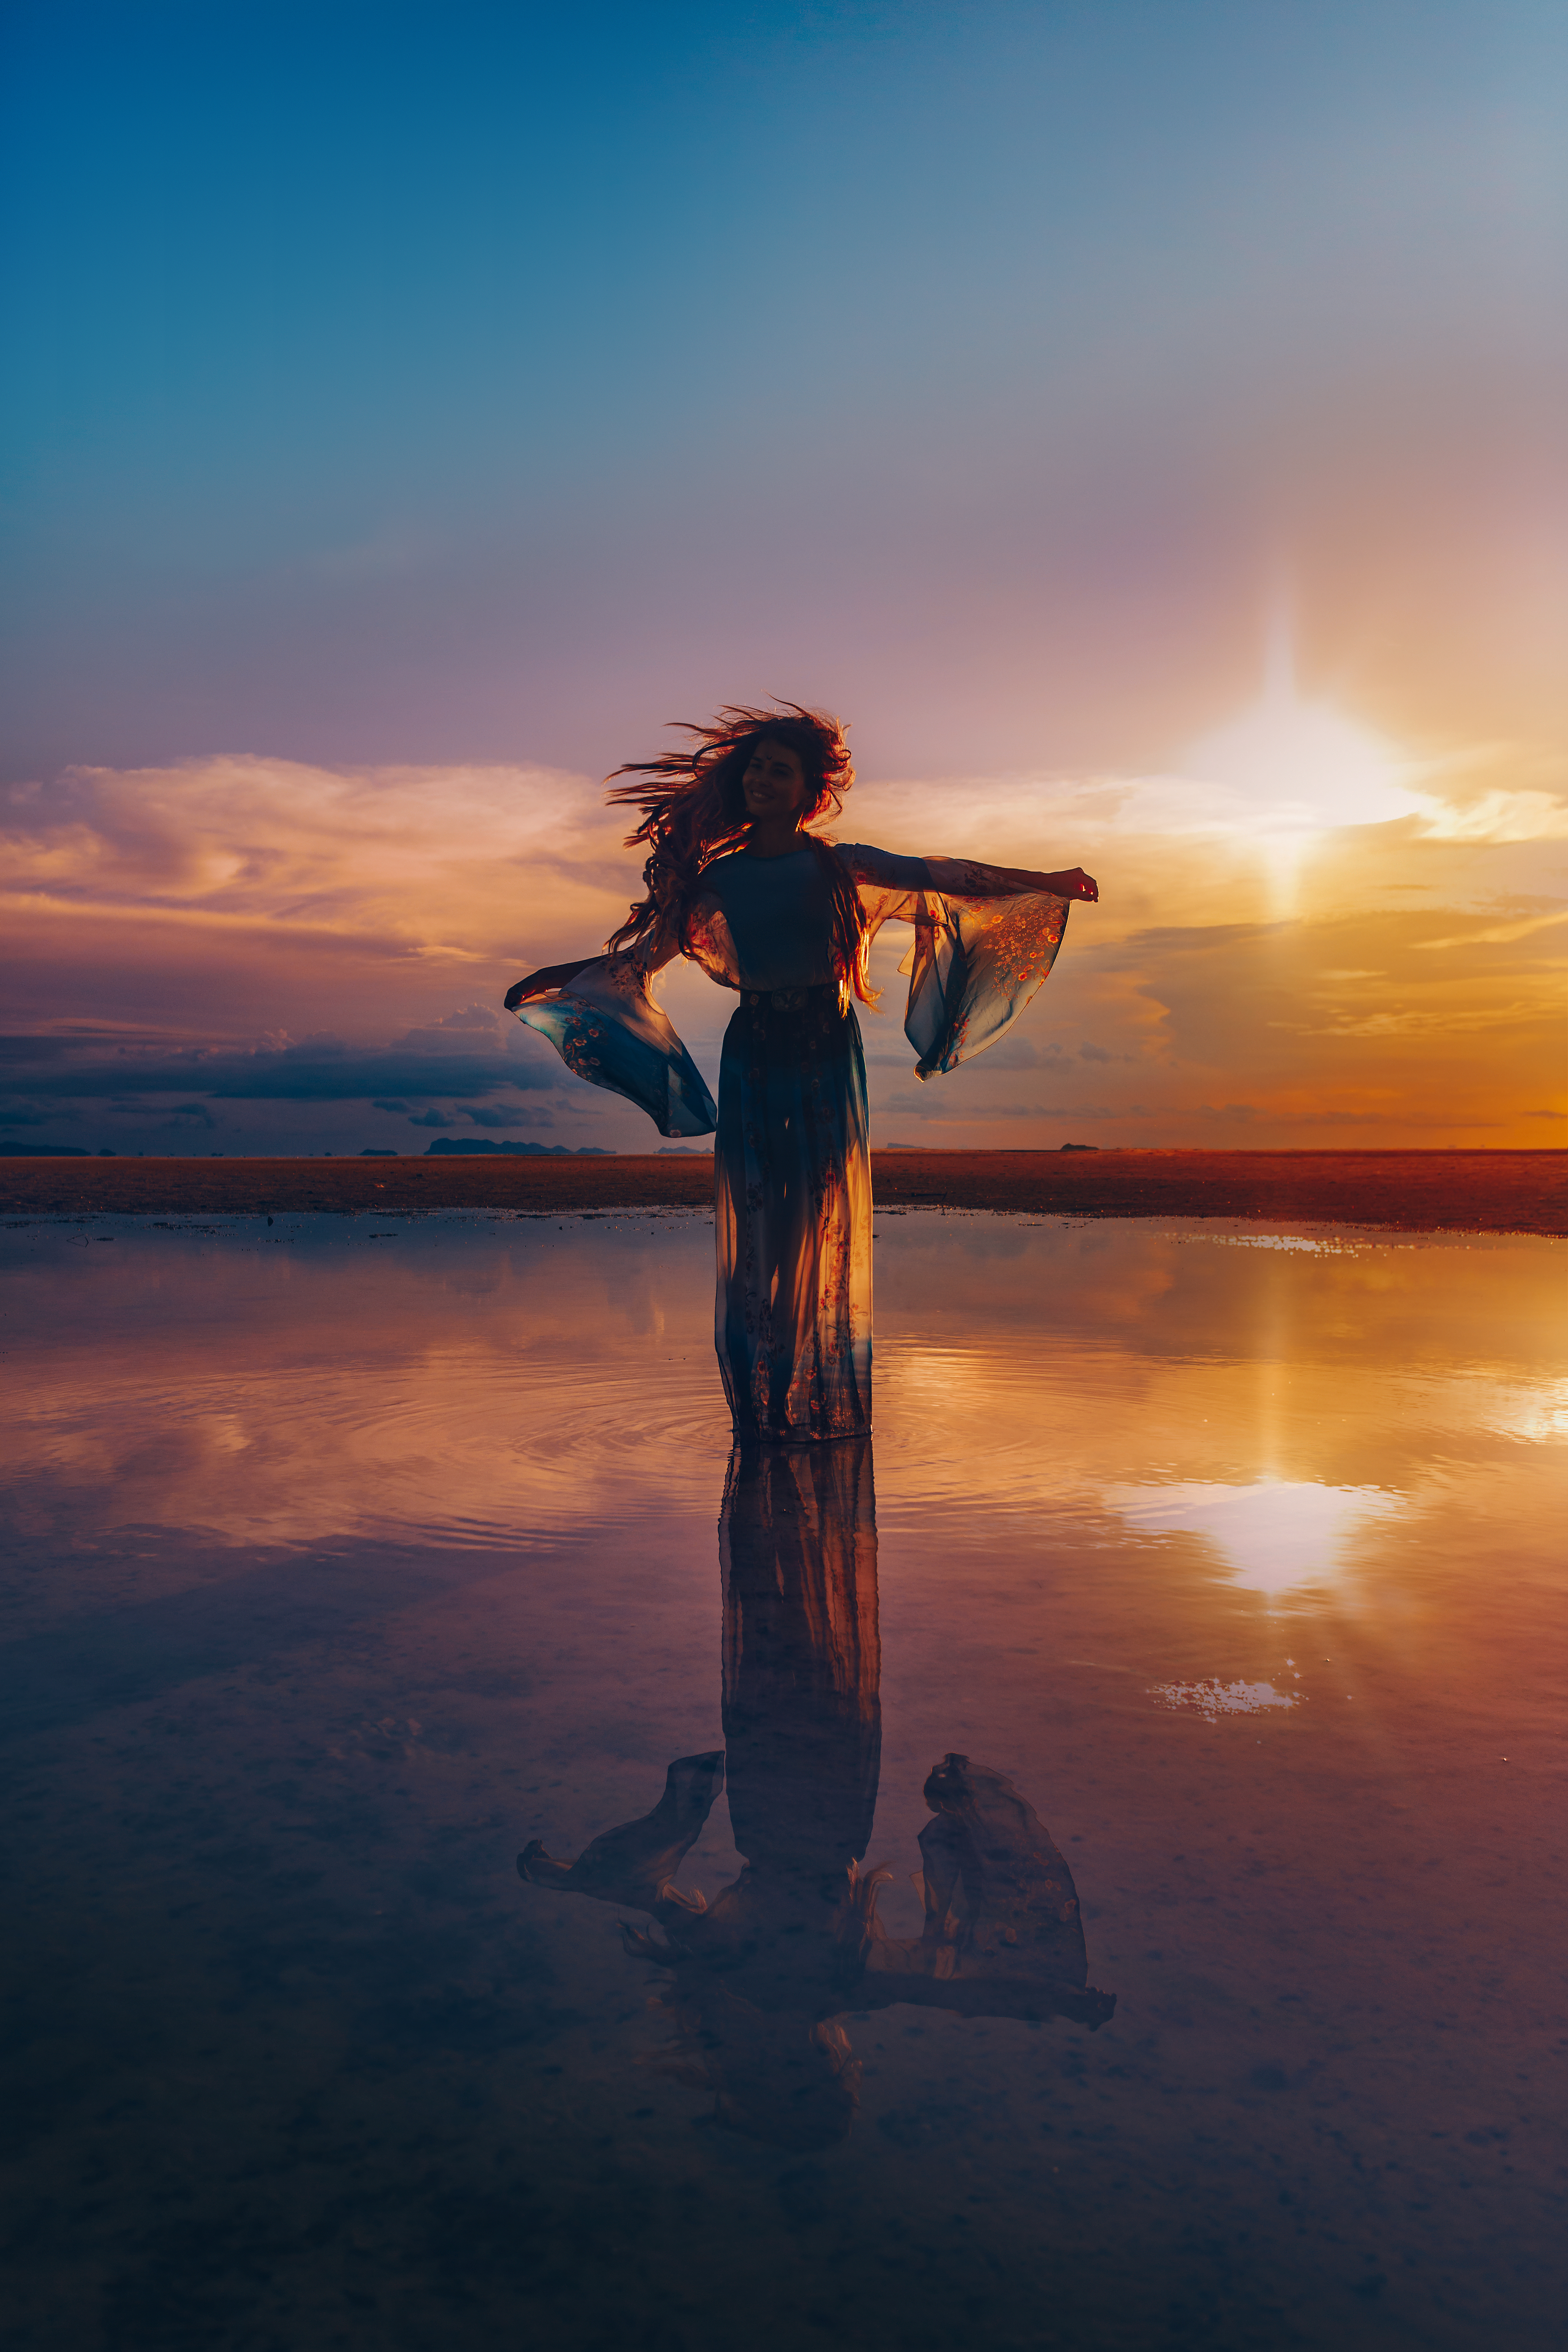 A portrait of a woman standing in the middle of a pond with her arms spread out during a sunset | Source: Shutterstock